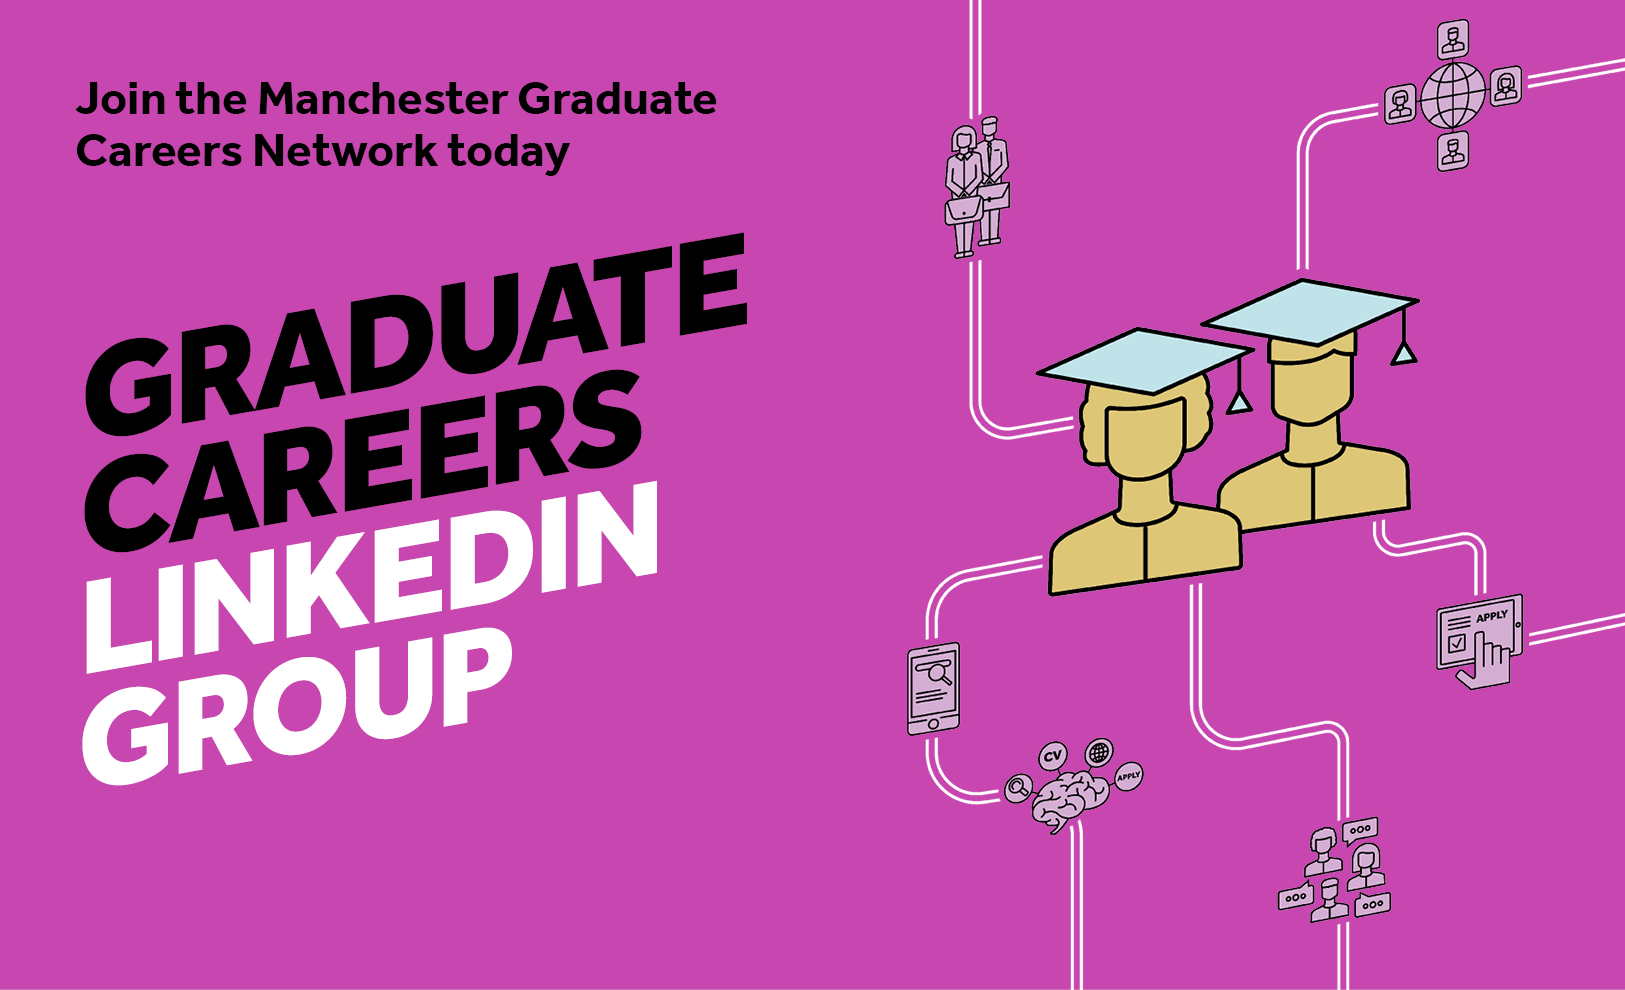 Purple background with graphic style image of 2 people wearing hats. Wording reads join the Manchester Graduate careers network today. Graduate Careers LinkedIn group